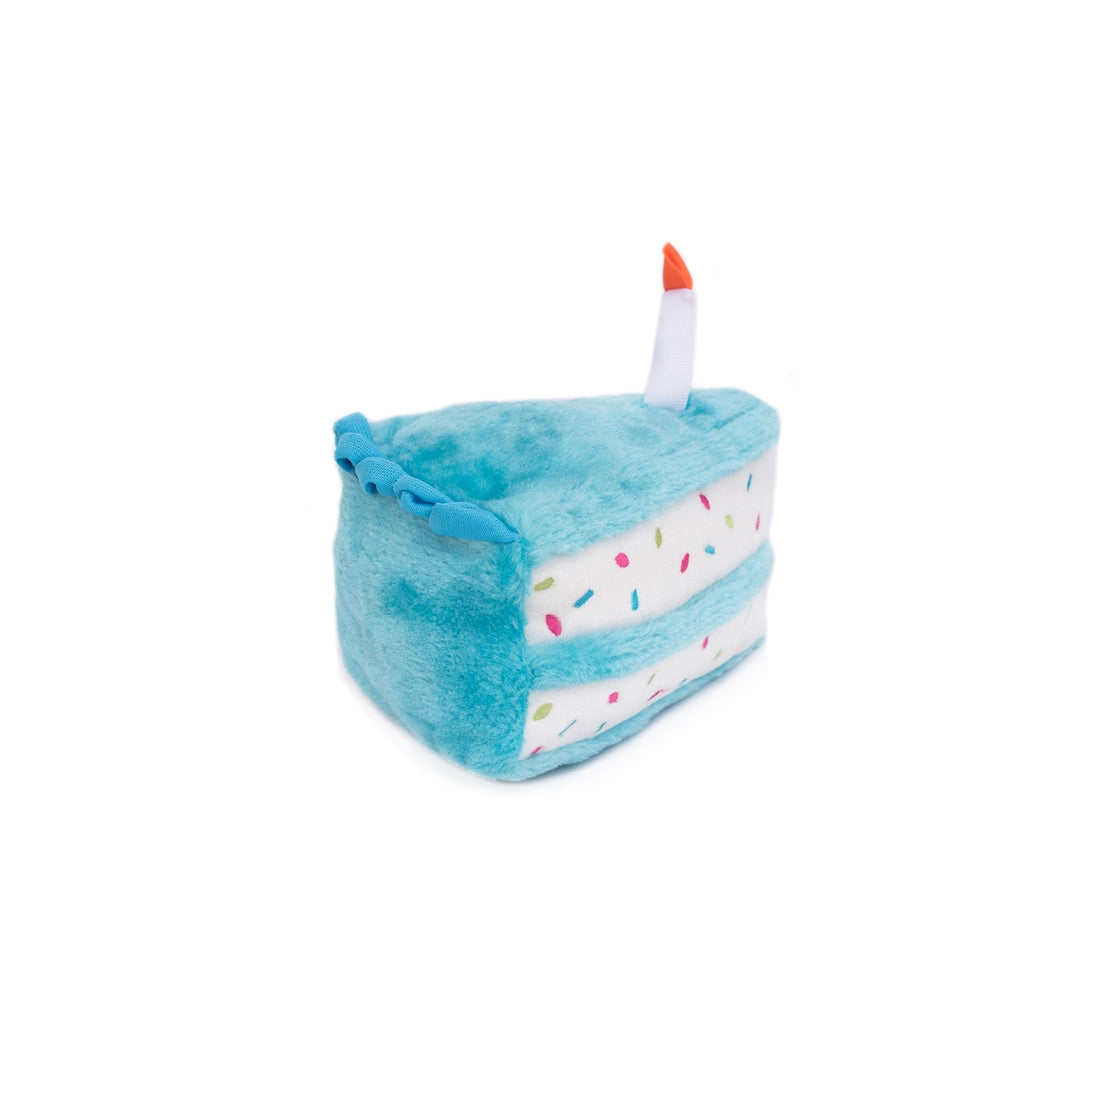 back view of the birthday cake slice toy